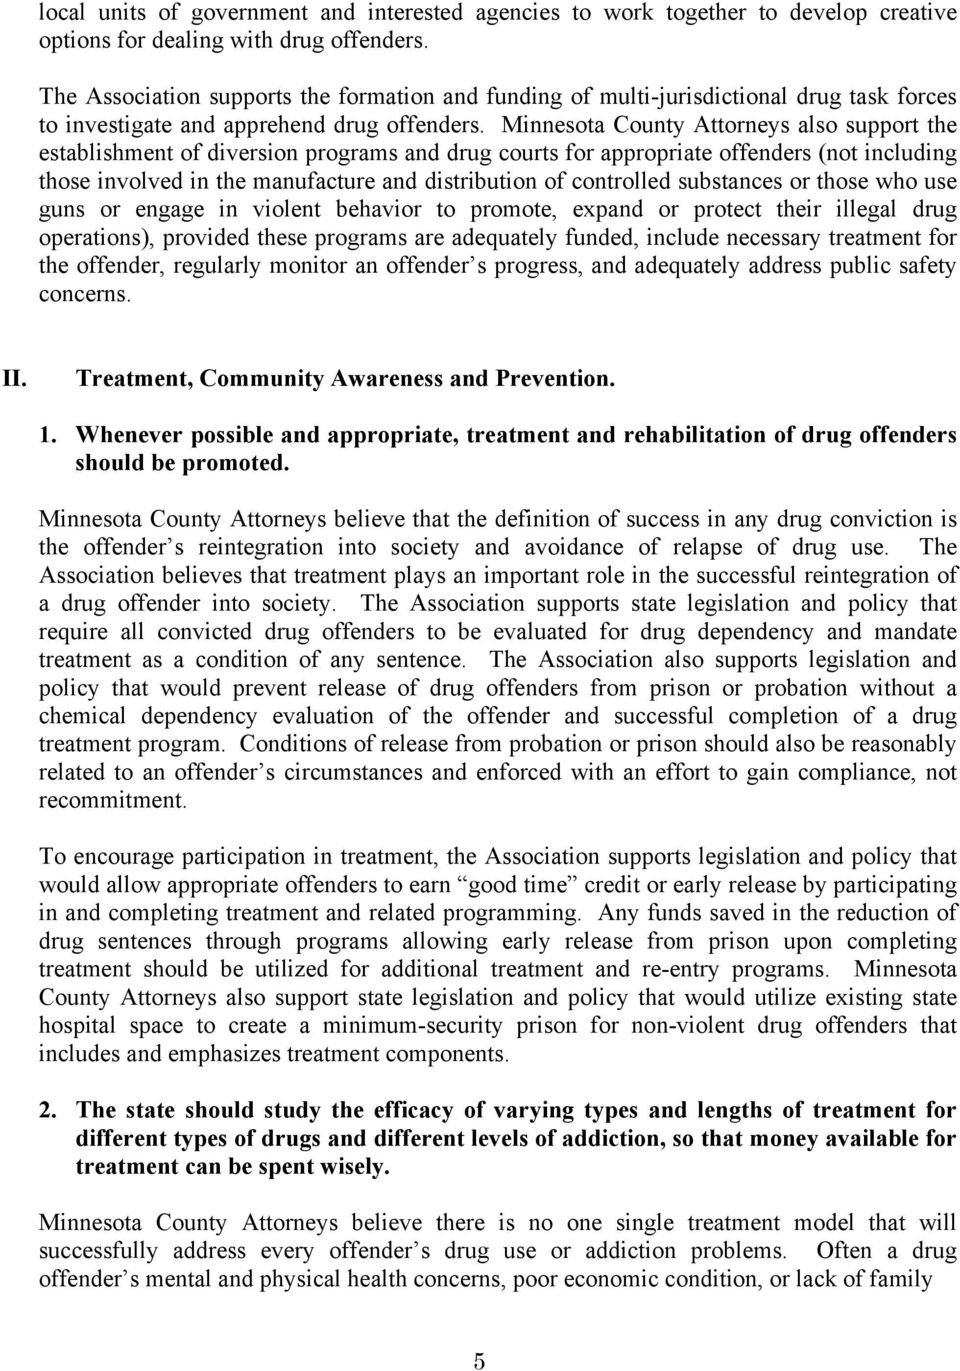 Minnesota County Attorneys also support the establishment of diversion programs and drug courts for appropriate offenders (not including those involved in the manufacture and distribution of